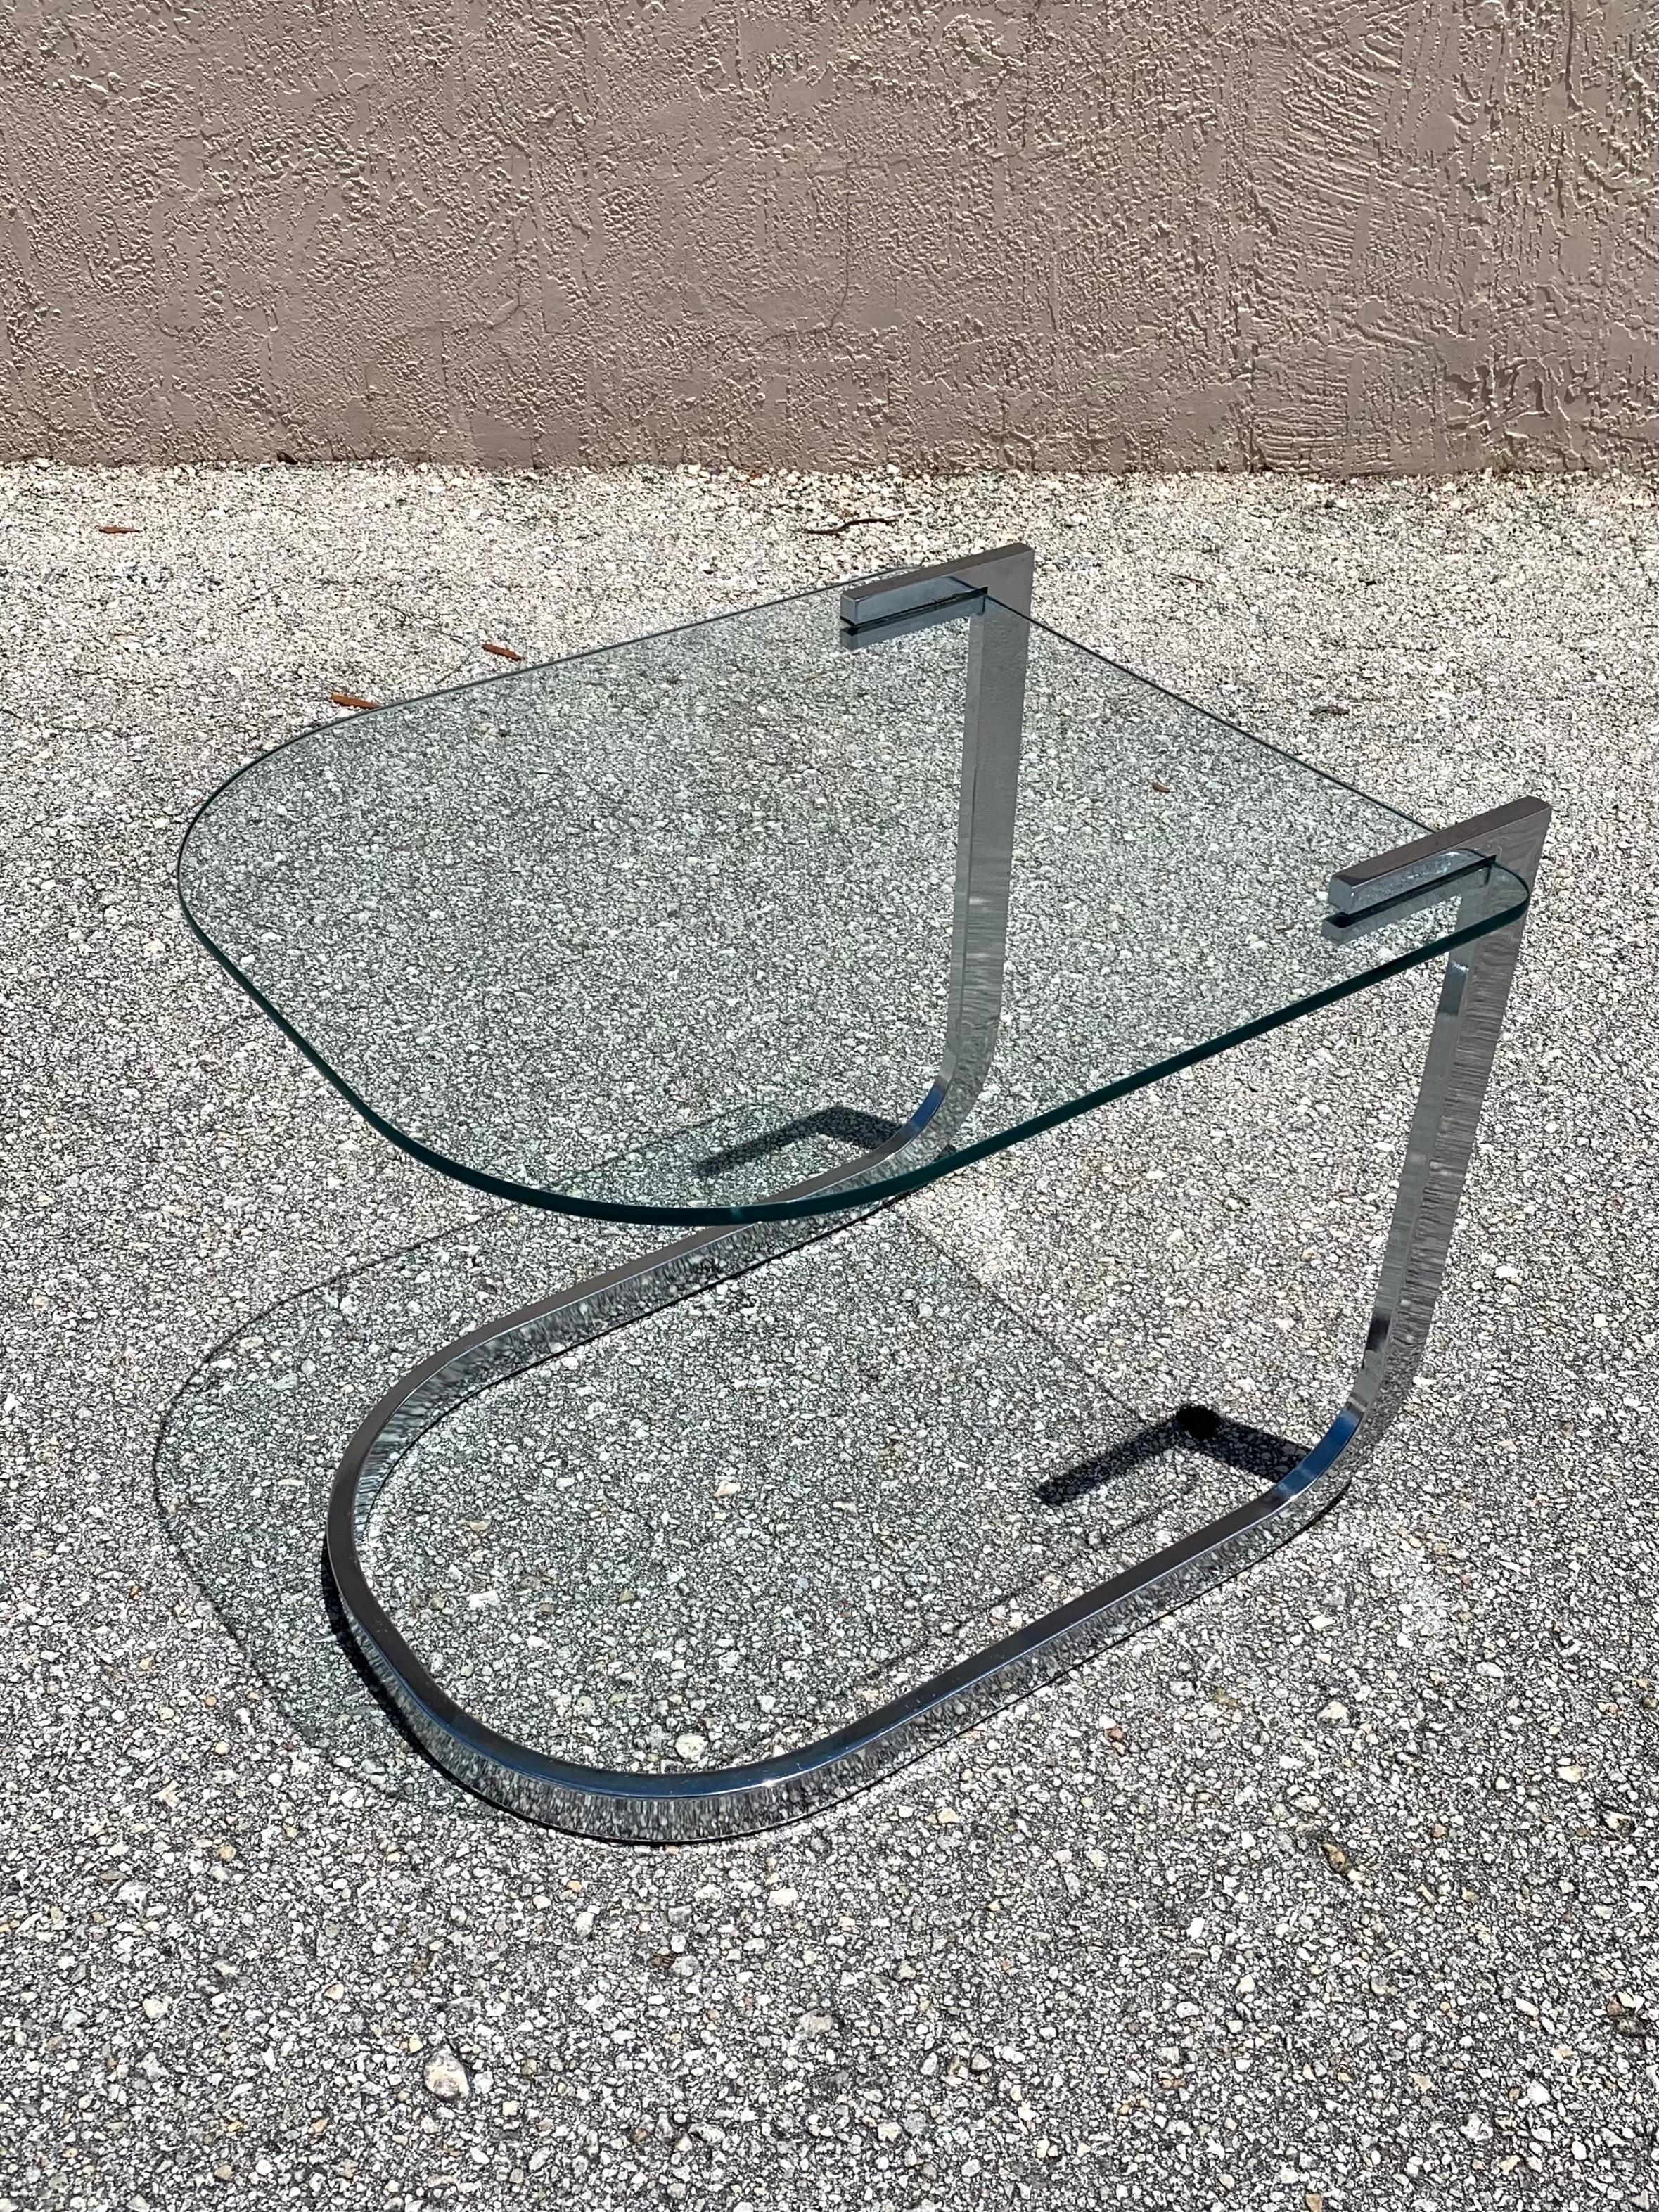 Mid-Century Modern Design Institute of America Chrome and Glass Nesting Tables In Good Condition For Sale In Boynton Beach, FL